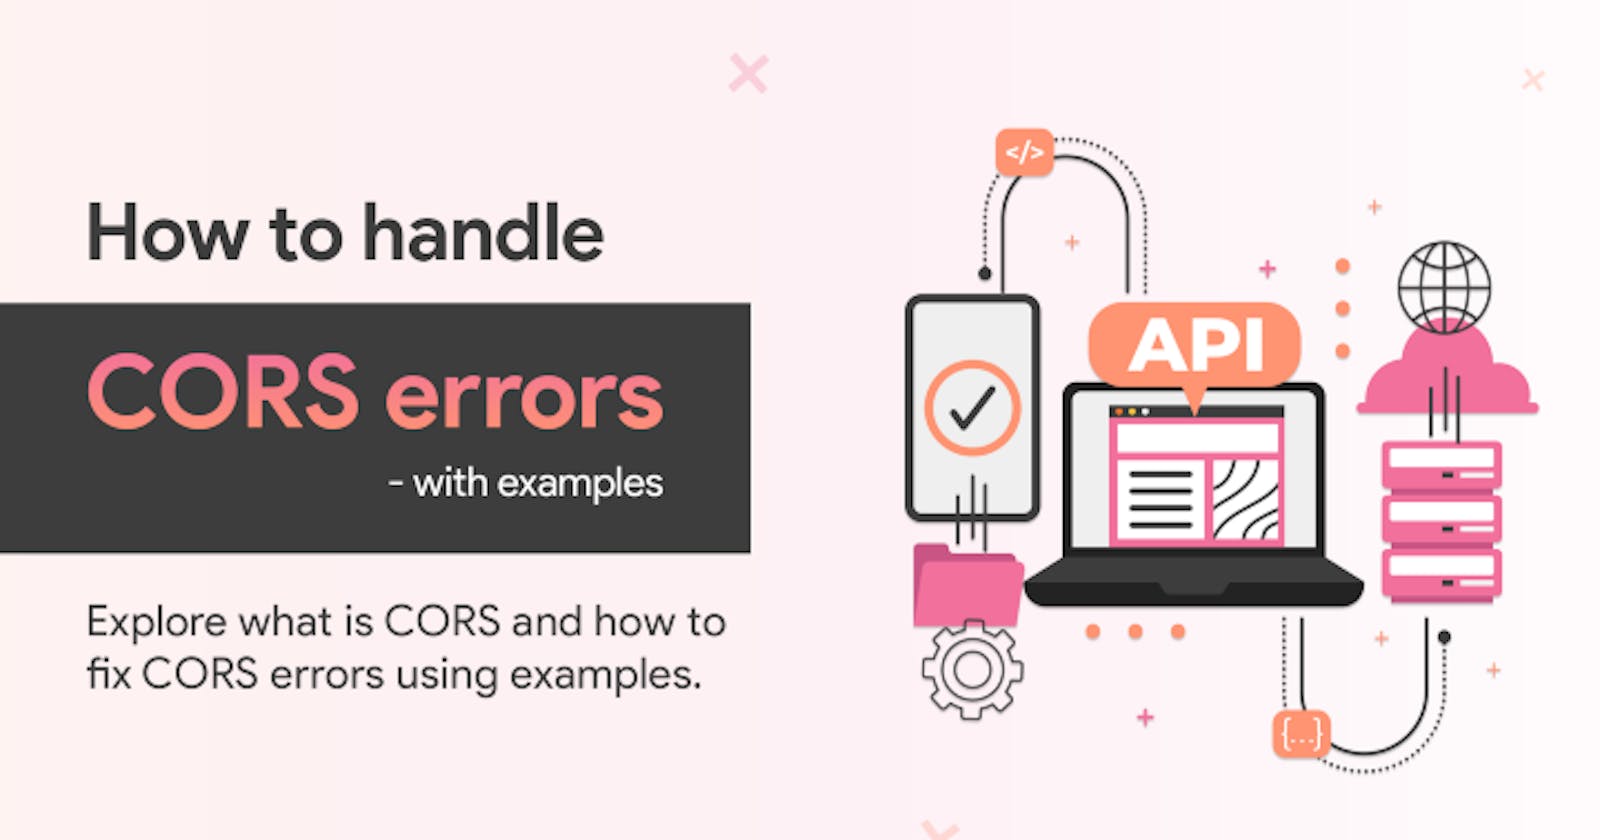 What is CORS and How to handle it with examples?